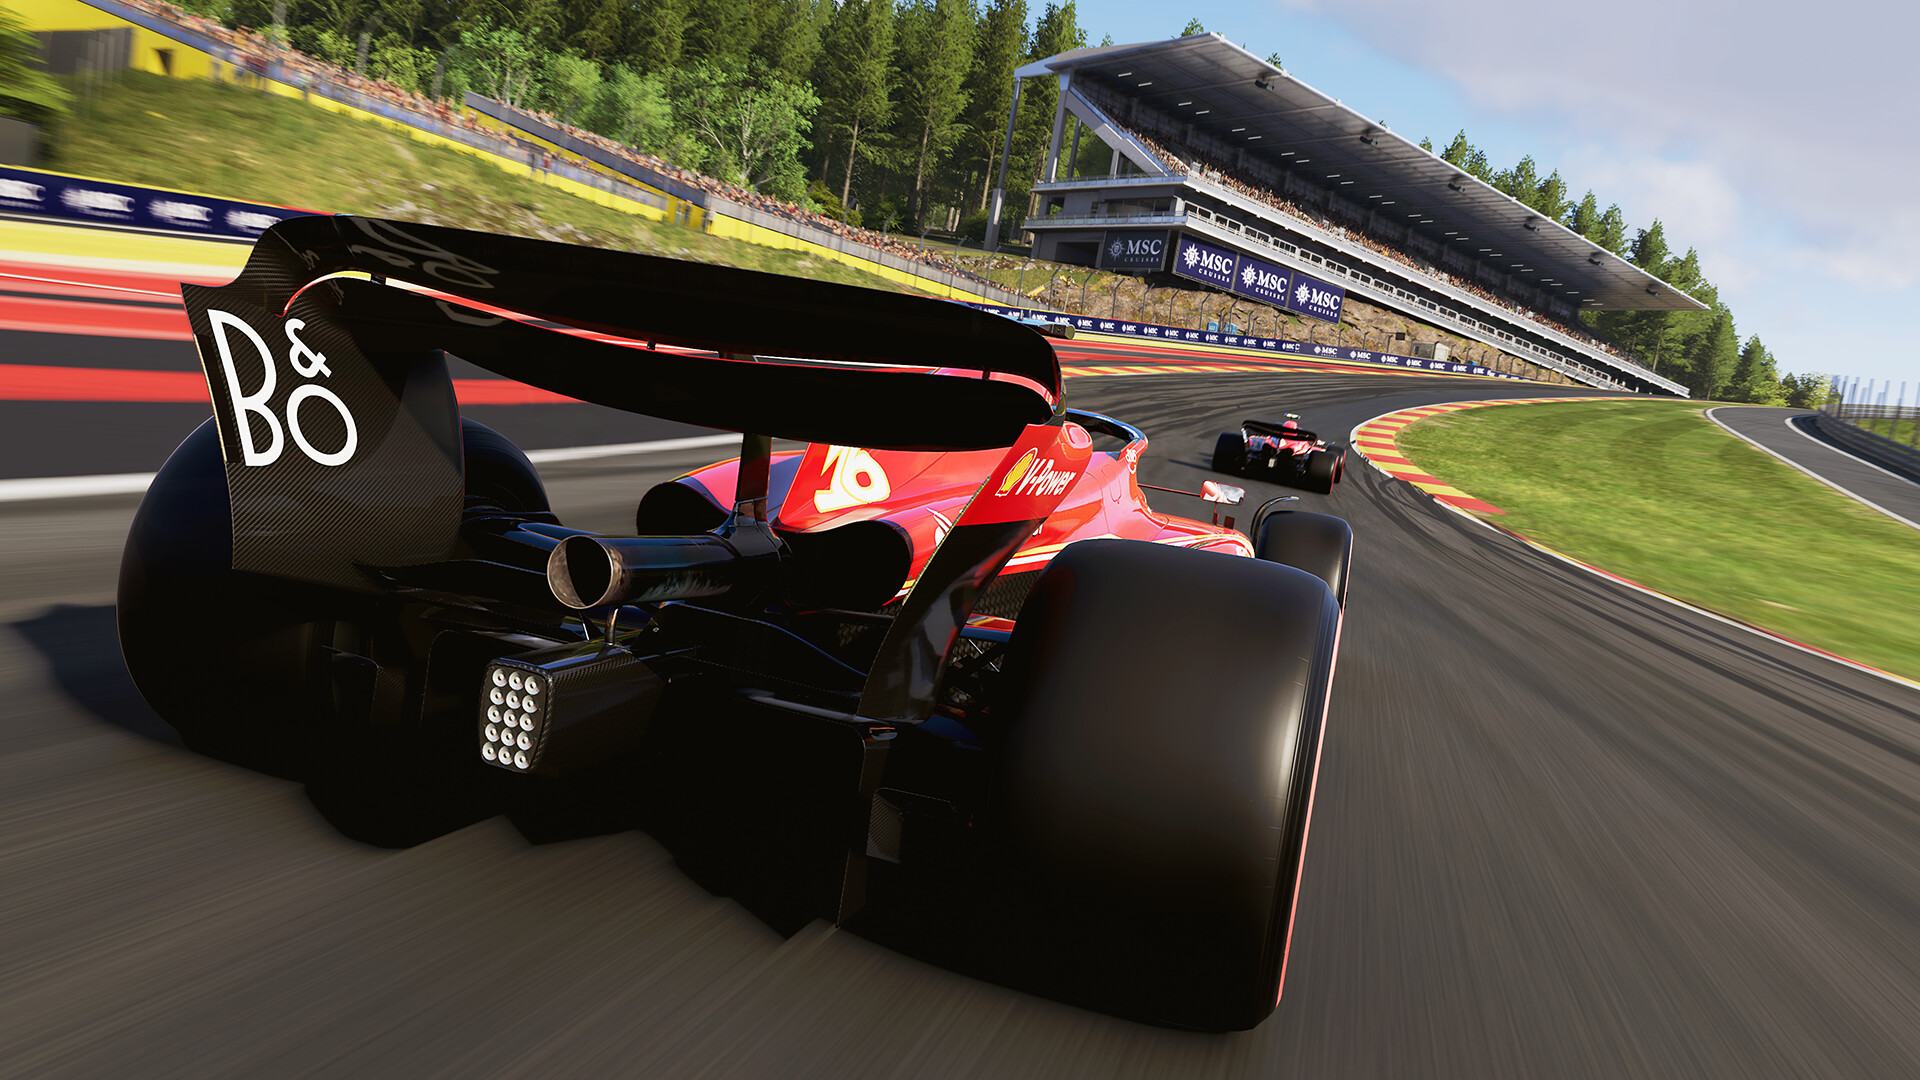 The No. 16 Ferrari of Charles LeClerc approaches the formidable Eau Rouge uphil turn at the Circuit of Spa-Francorchamps in Belgium, in the F1 24 video game.